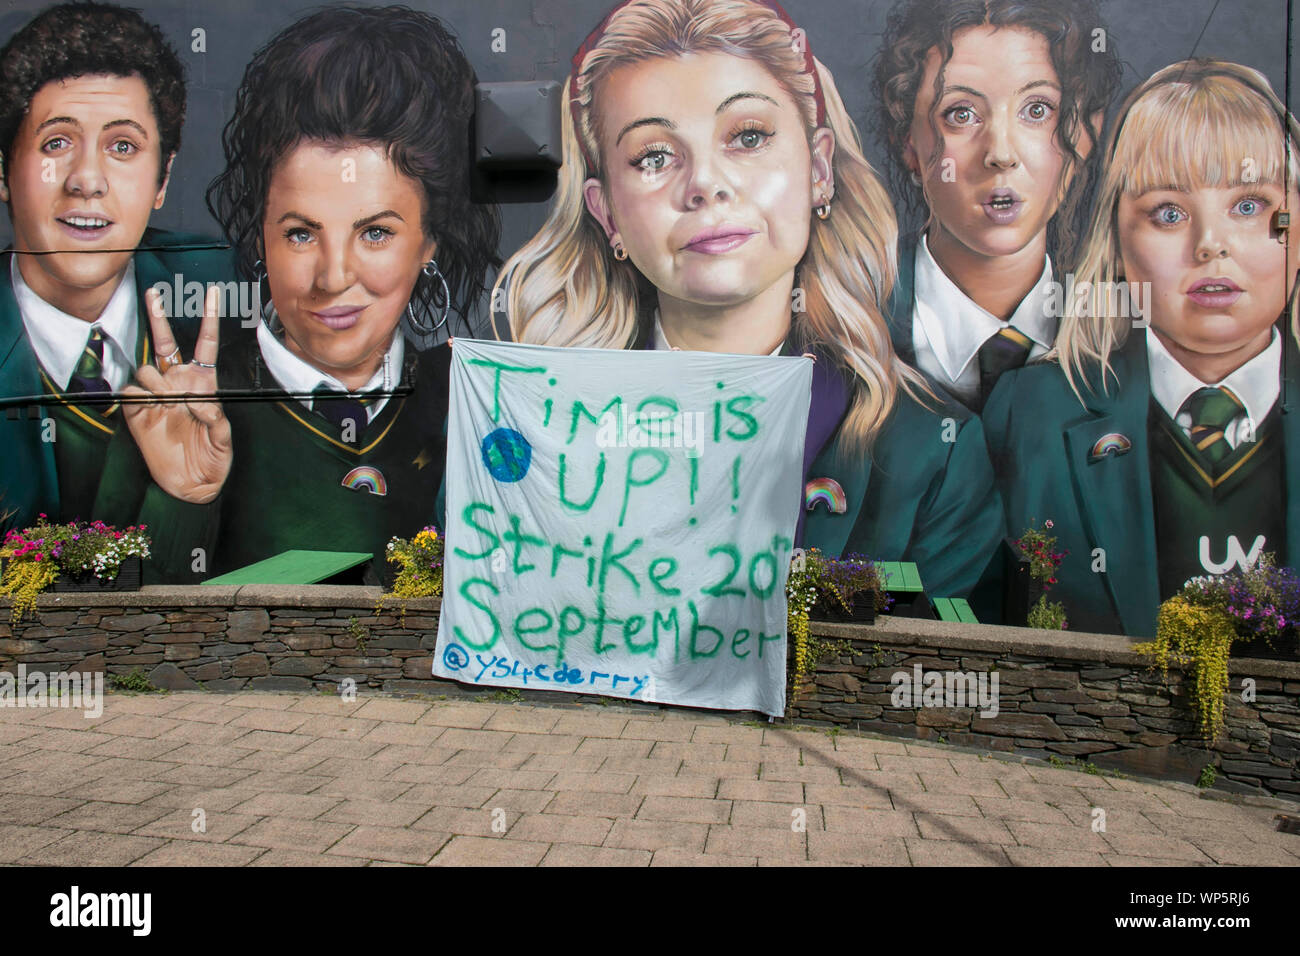 Young climate change activists with their banner advertising teh climate change strike on 20 Spetember in front of the Derry Girls mural. Stock Photo